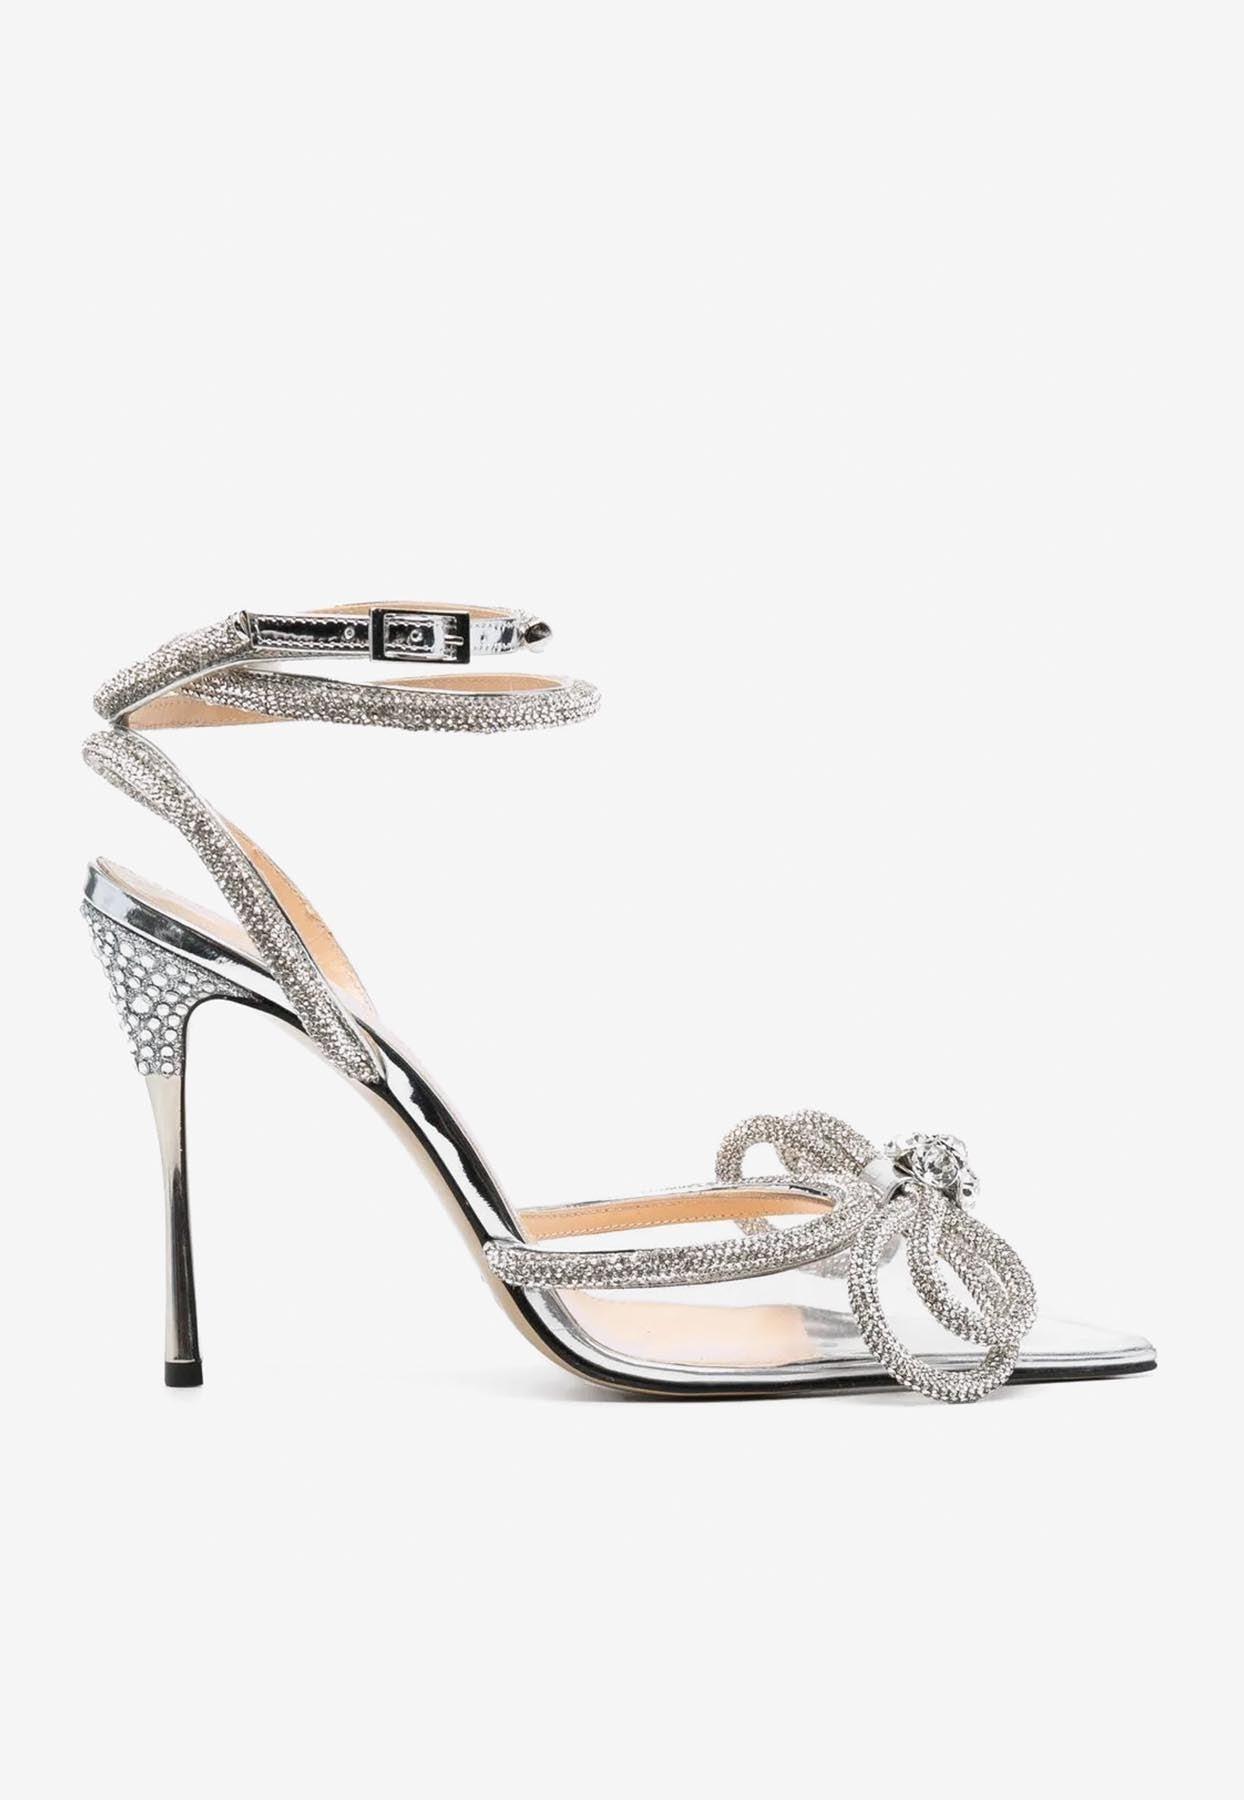 Mach & Mach 120 Crystal Embellished Double-bow Pumps in White | Lyst